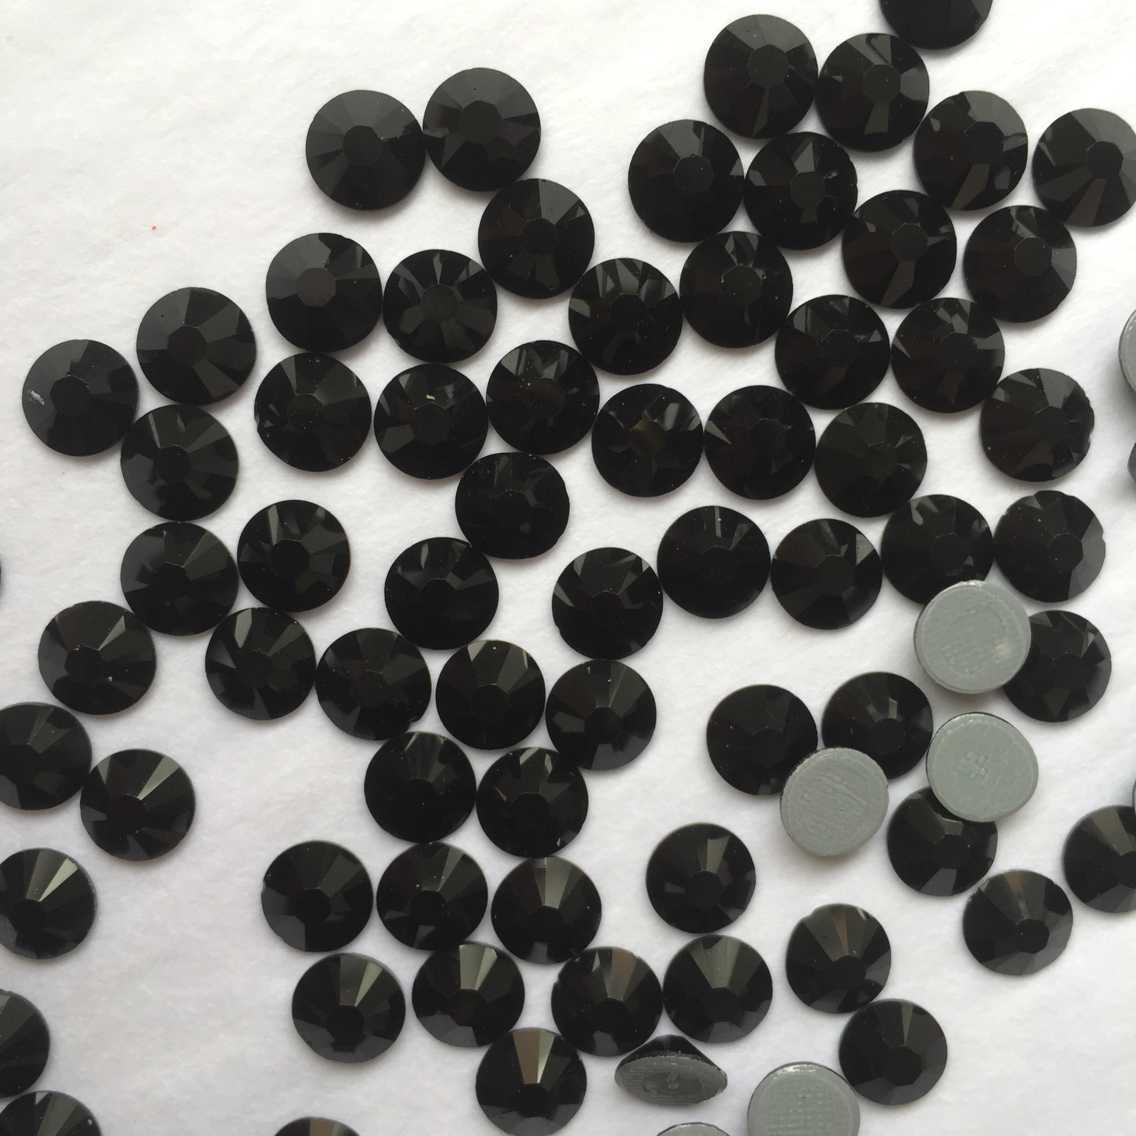 Jpstrass-Find Manufacture About Jp Strass Hot Fix Rhinestones For Wholesale